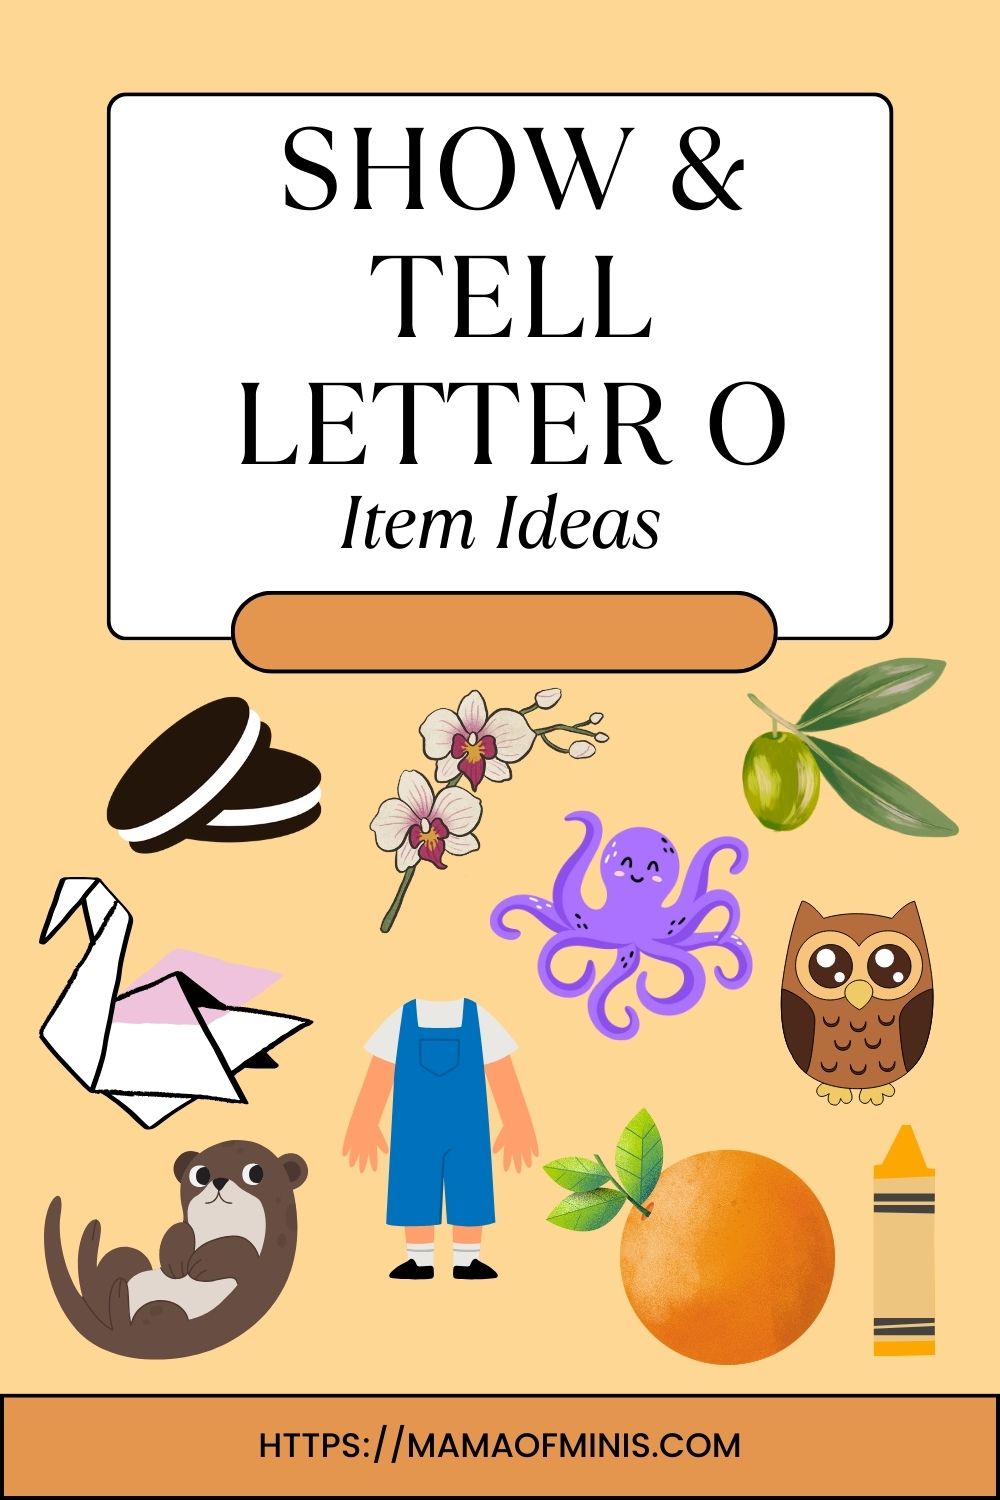 Show and Tell Letter O Item Ideas